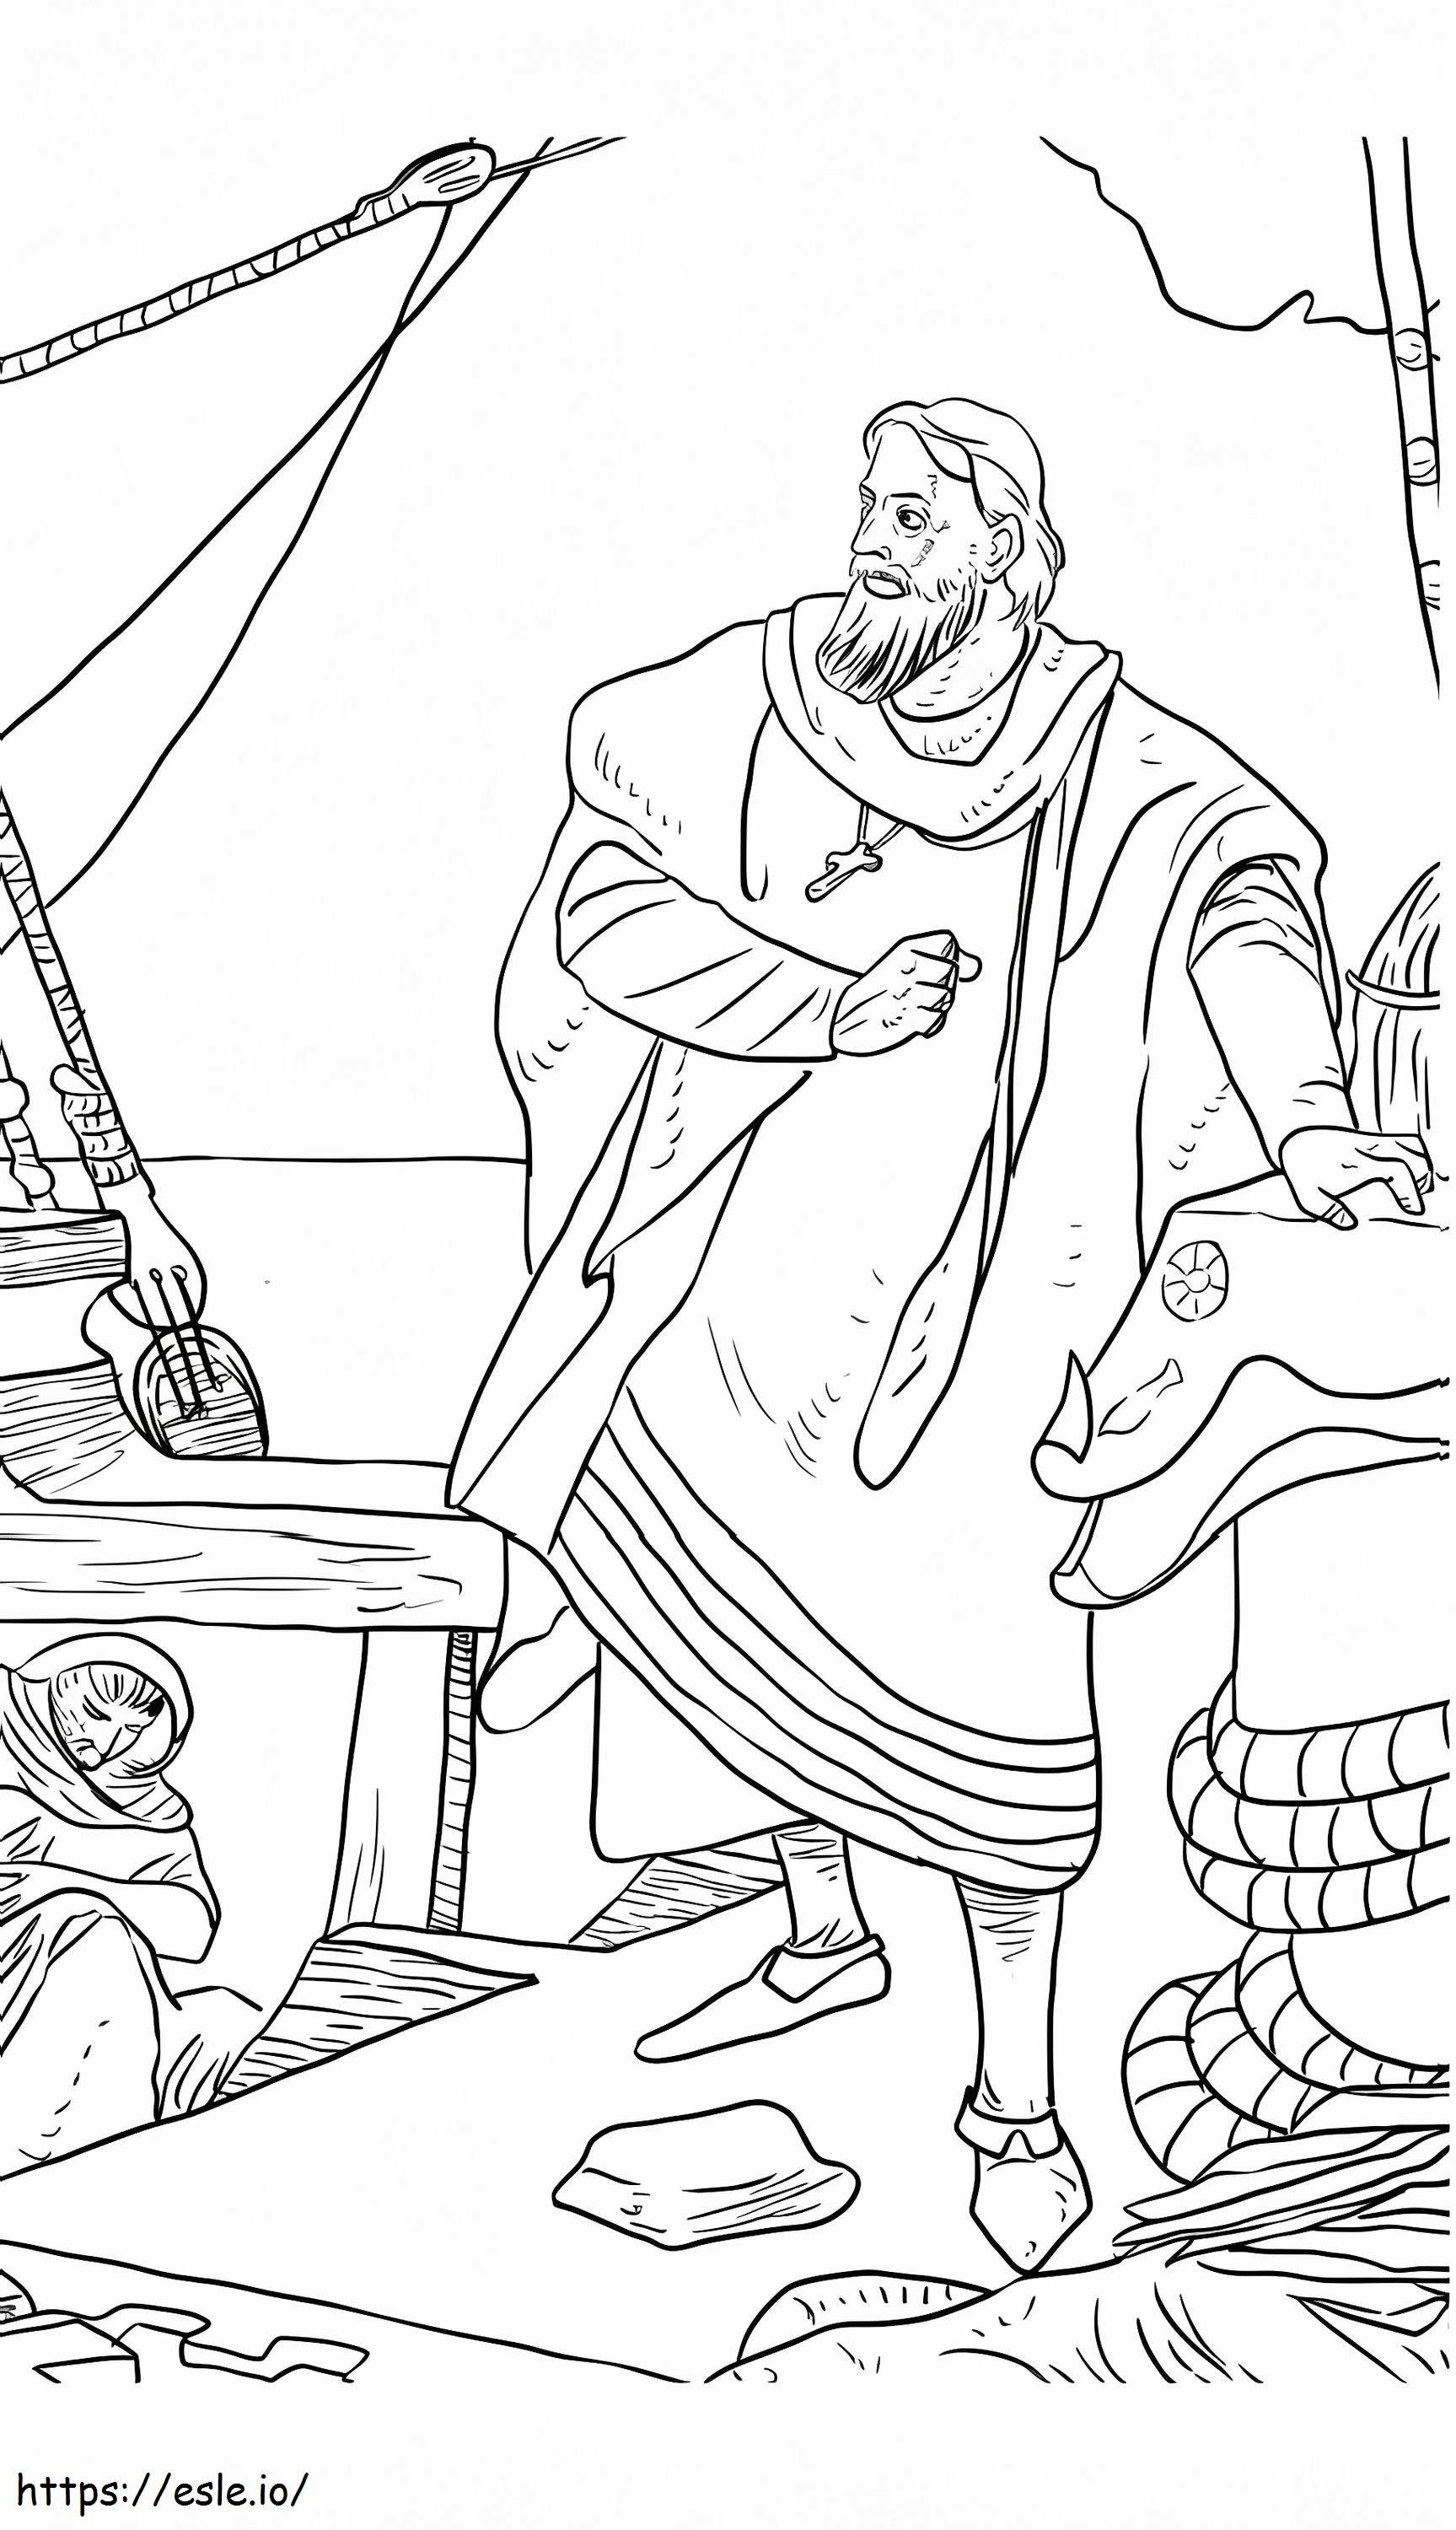 1559873544 Christopher Columbus A4 coloring page